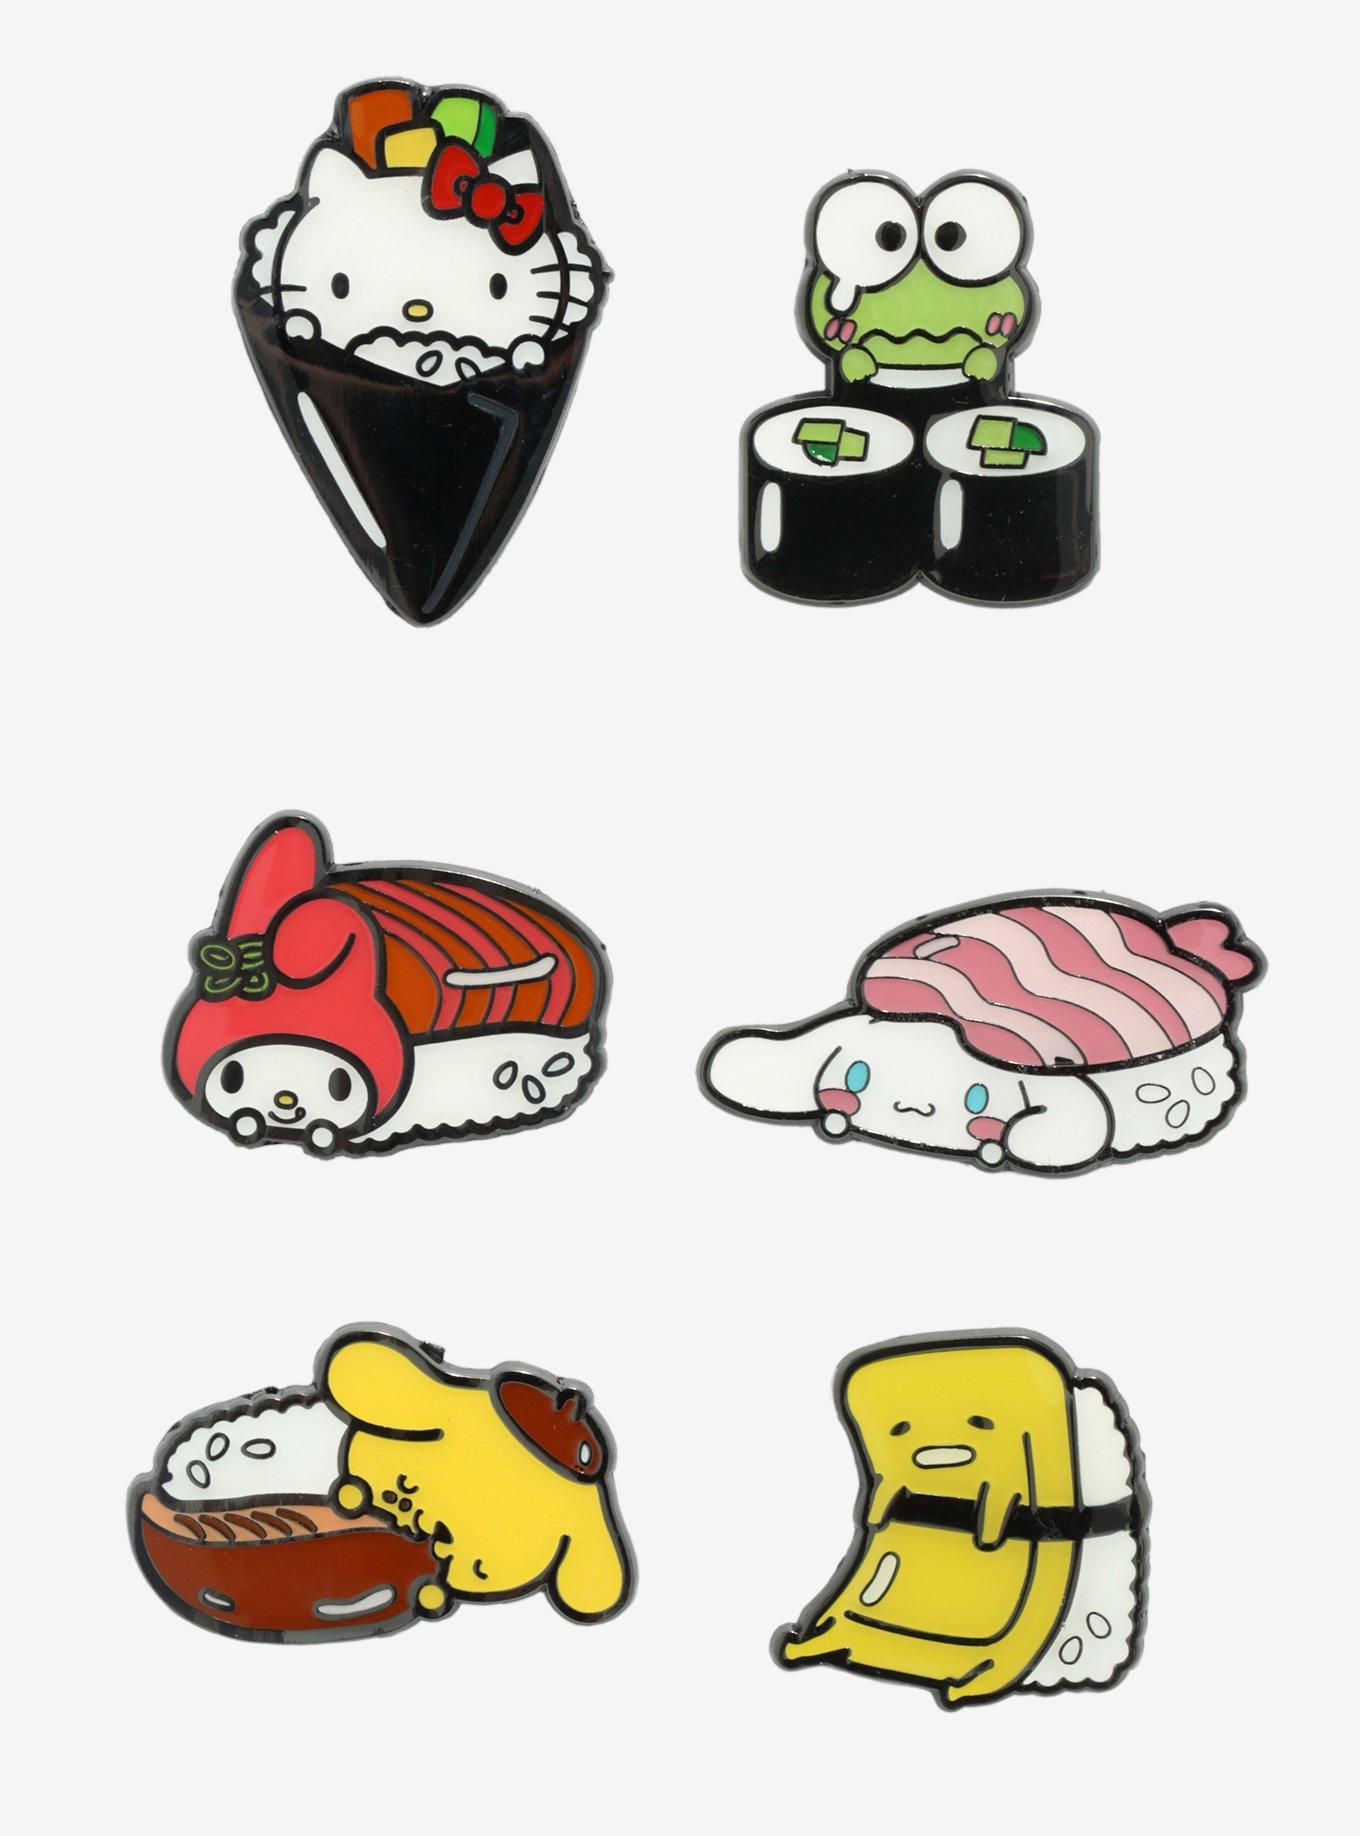 Hello Kitty And Friends Sushi Blind Box Enamel Pin